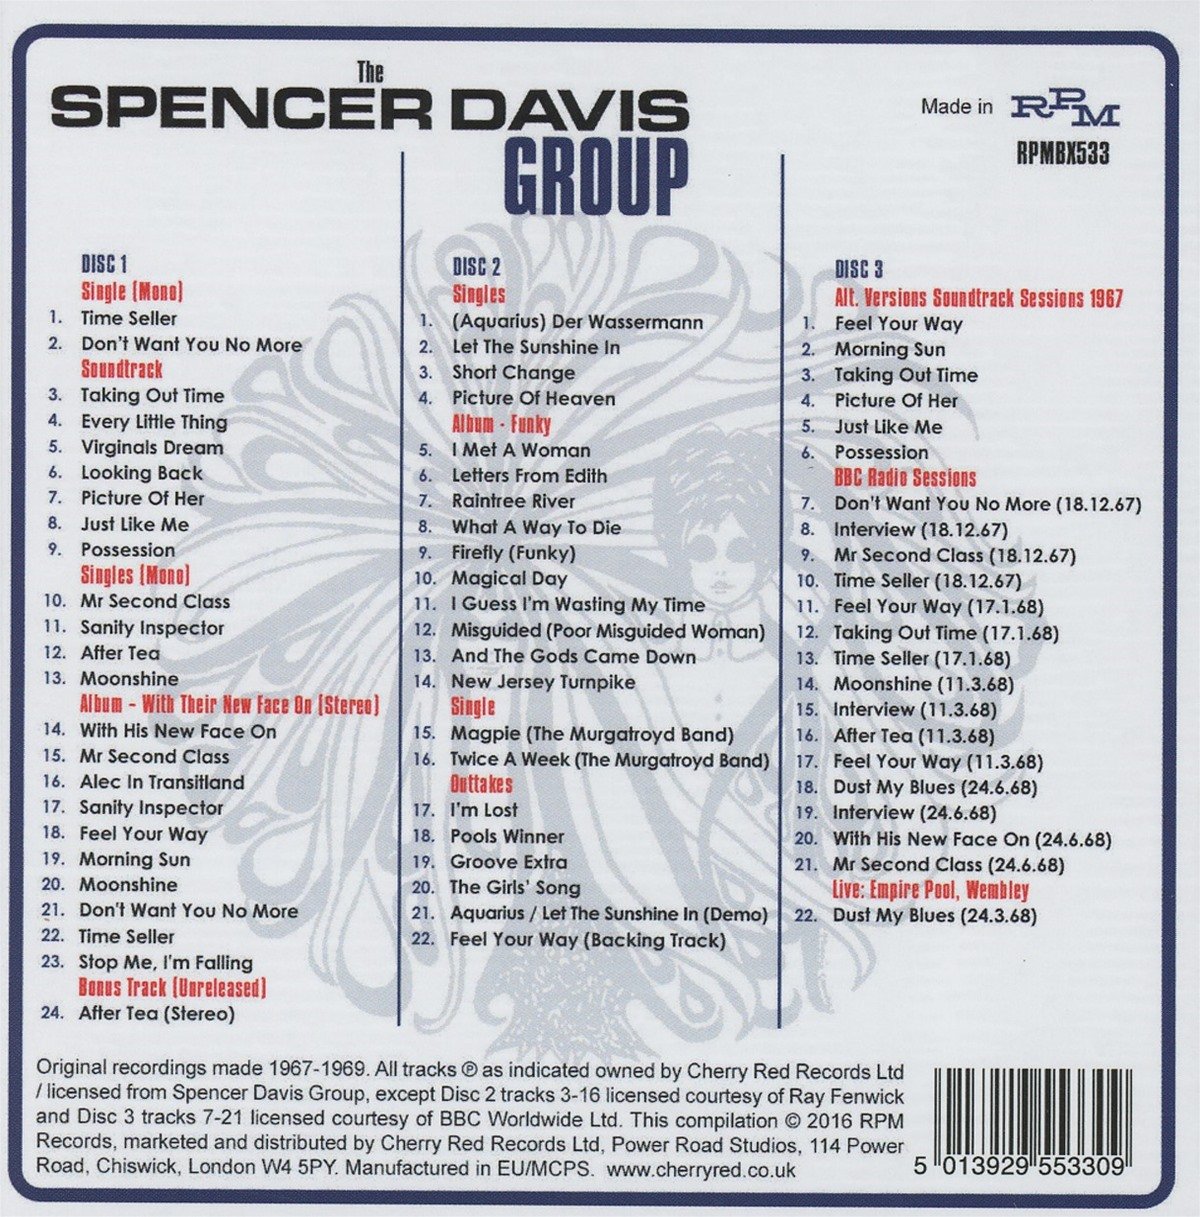 Spencer Davis Group (스펜서 데이비스 그룹) -Taking Out Time: (Complete Recordings 1967-1969) 